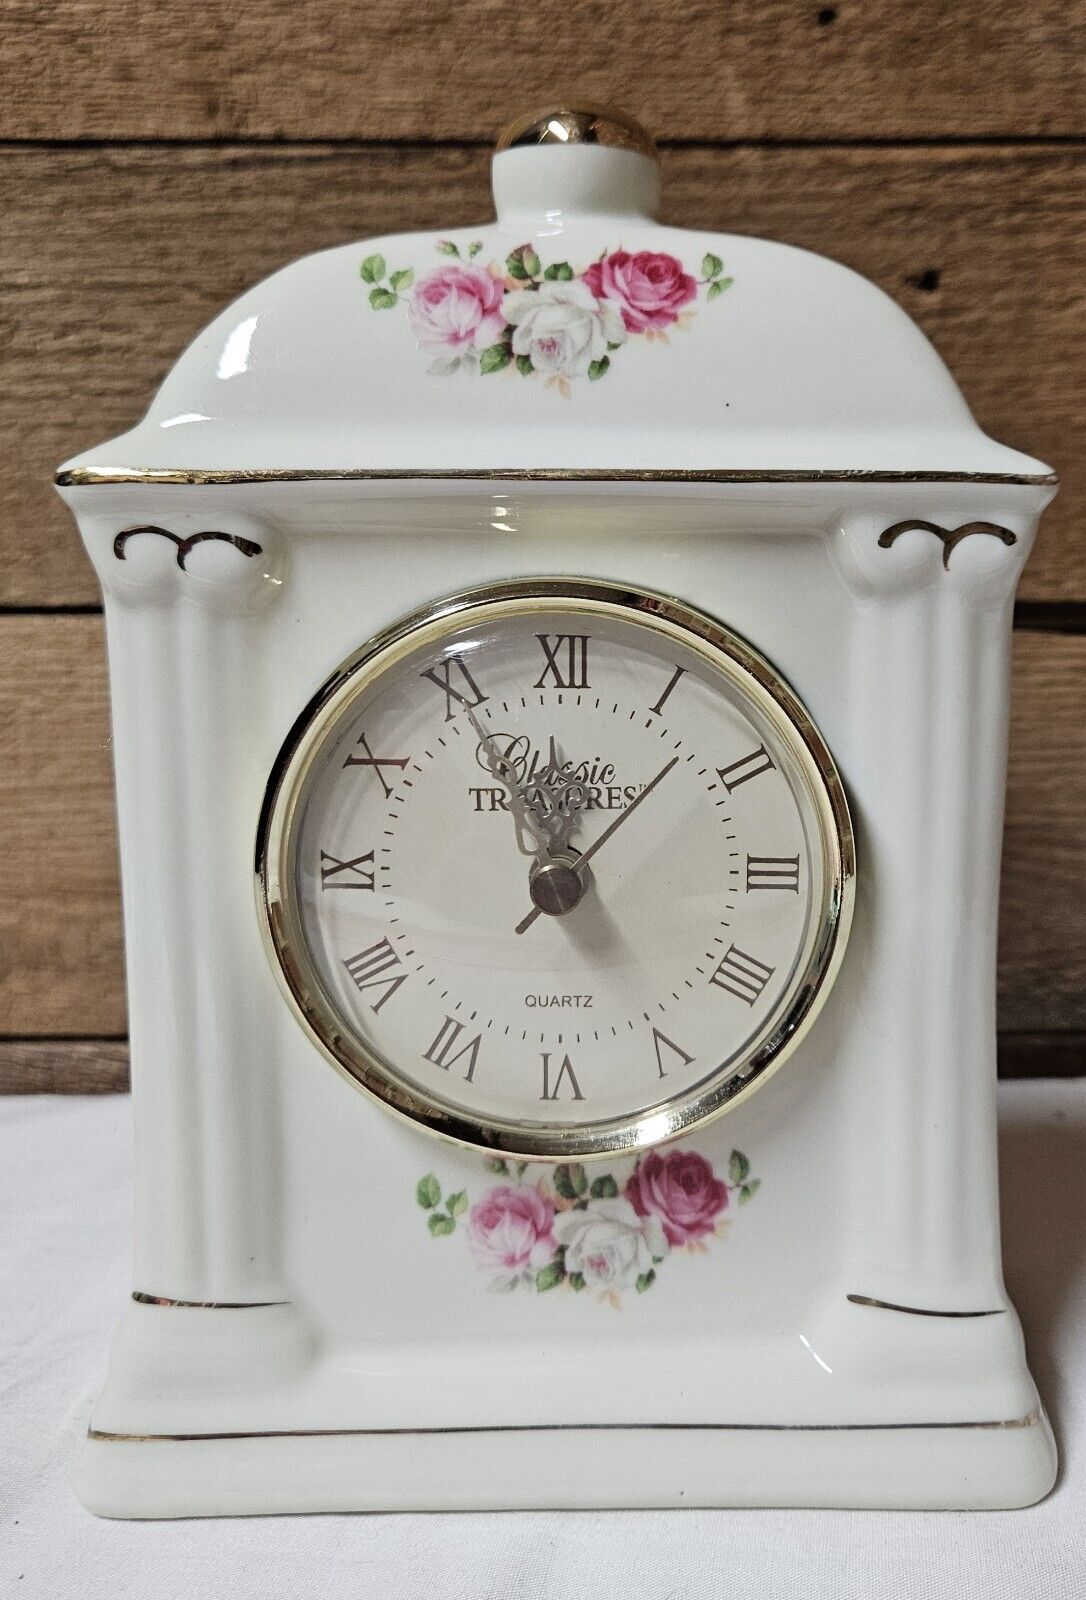 Classic Treasures Mantle Carriage Clock Pink Rose Porcelain Collectable [Works]